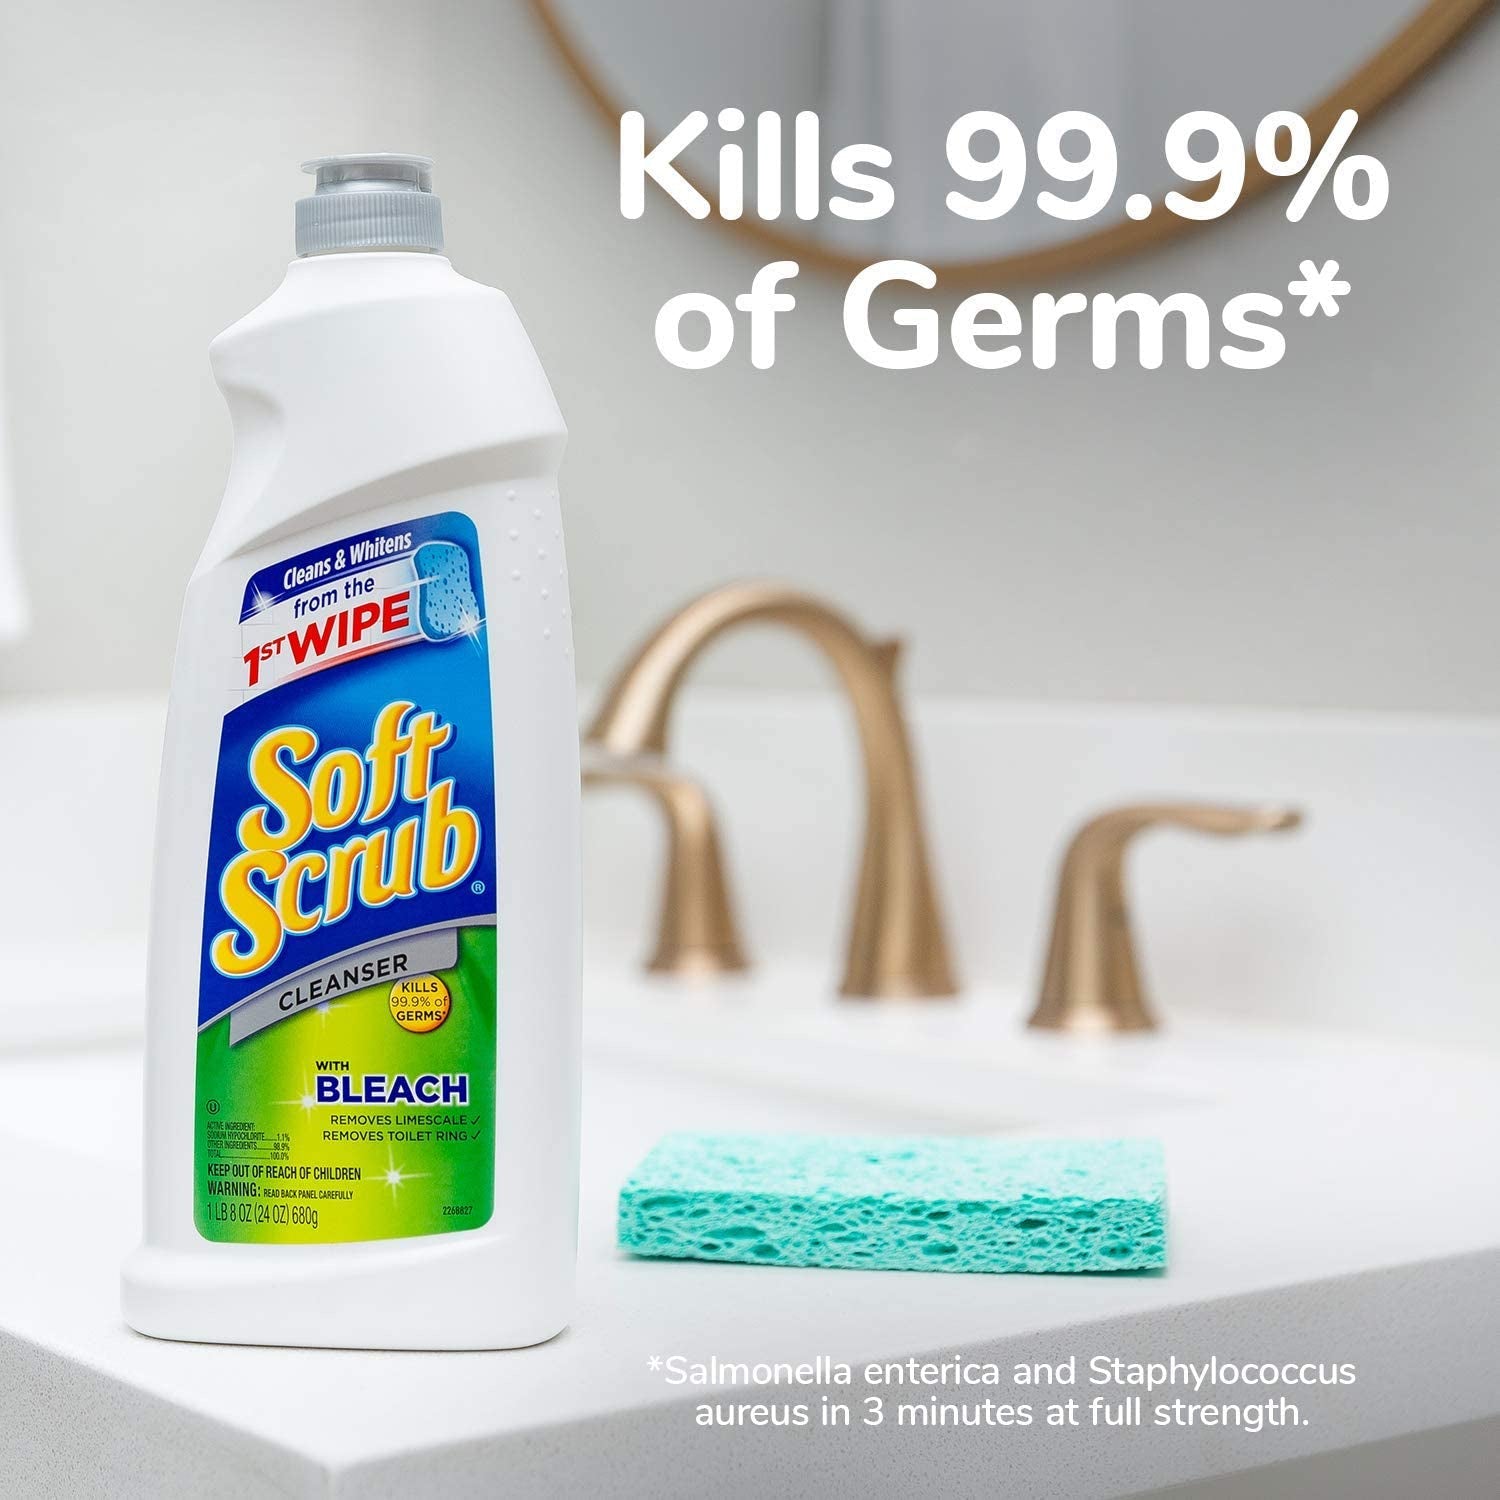 Soft Scrub Cleanser with Bleach Surface Cleaner, Kills 99.9% of Germs, 24 Fluid Ounces